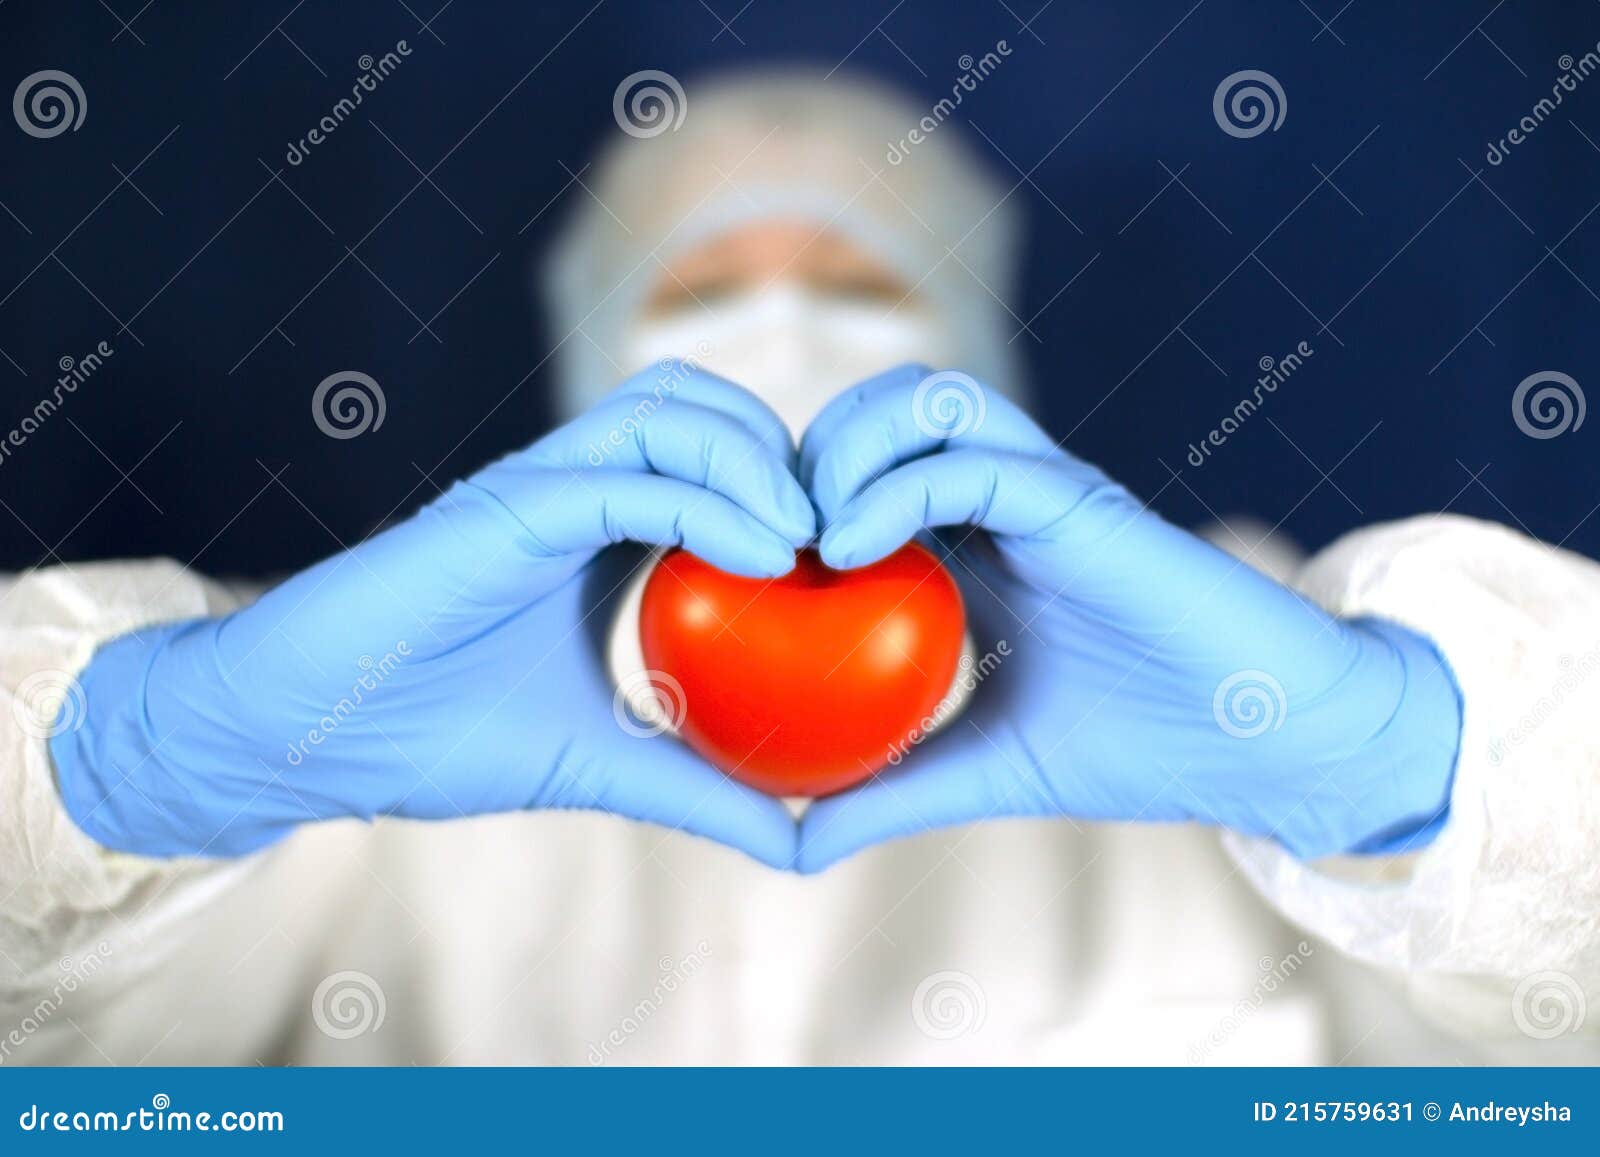 The Heart is in the Doctor S Hands. the Concept of Cardiology and ...